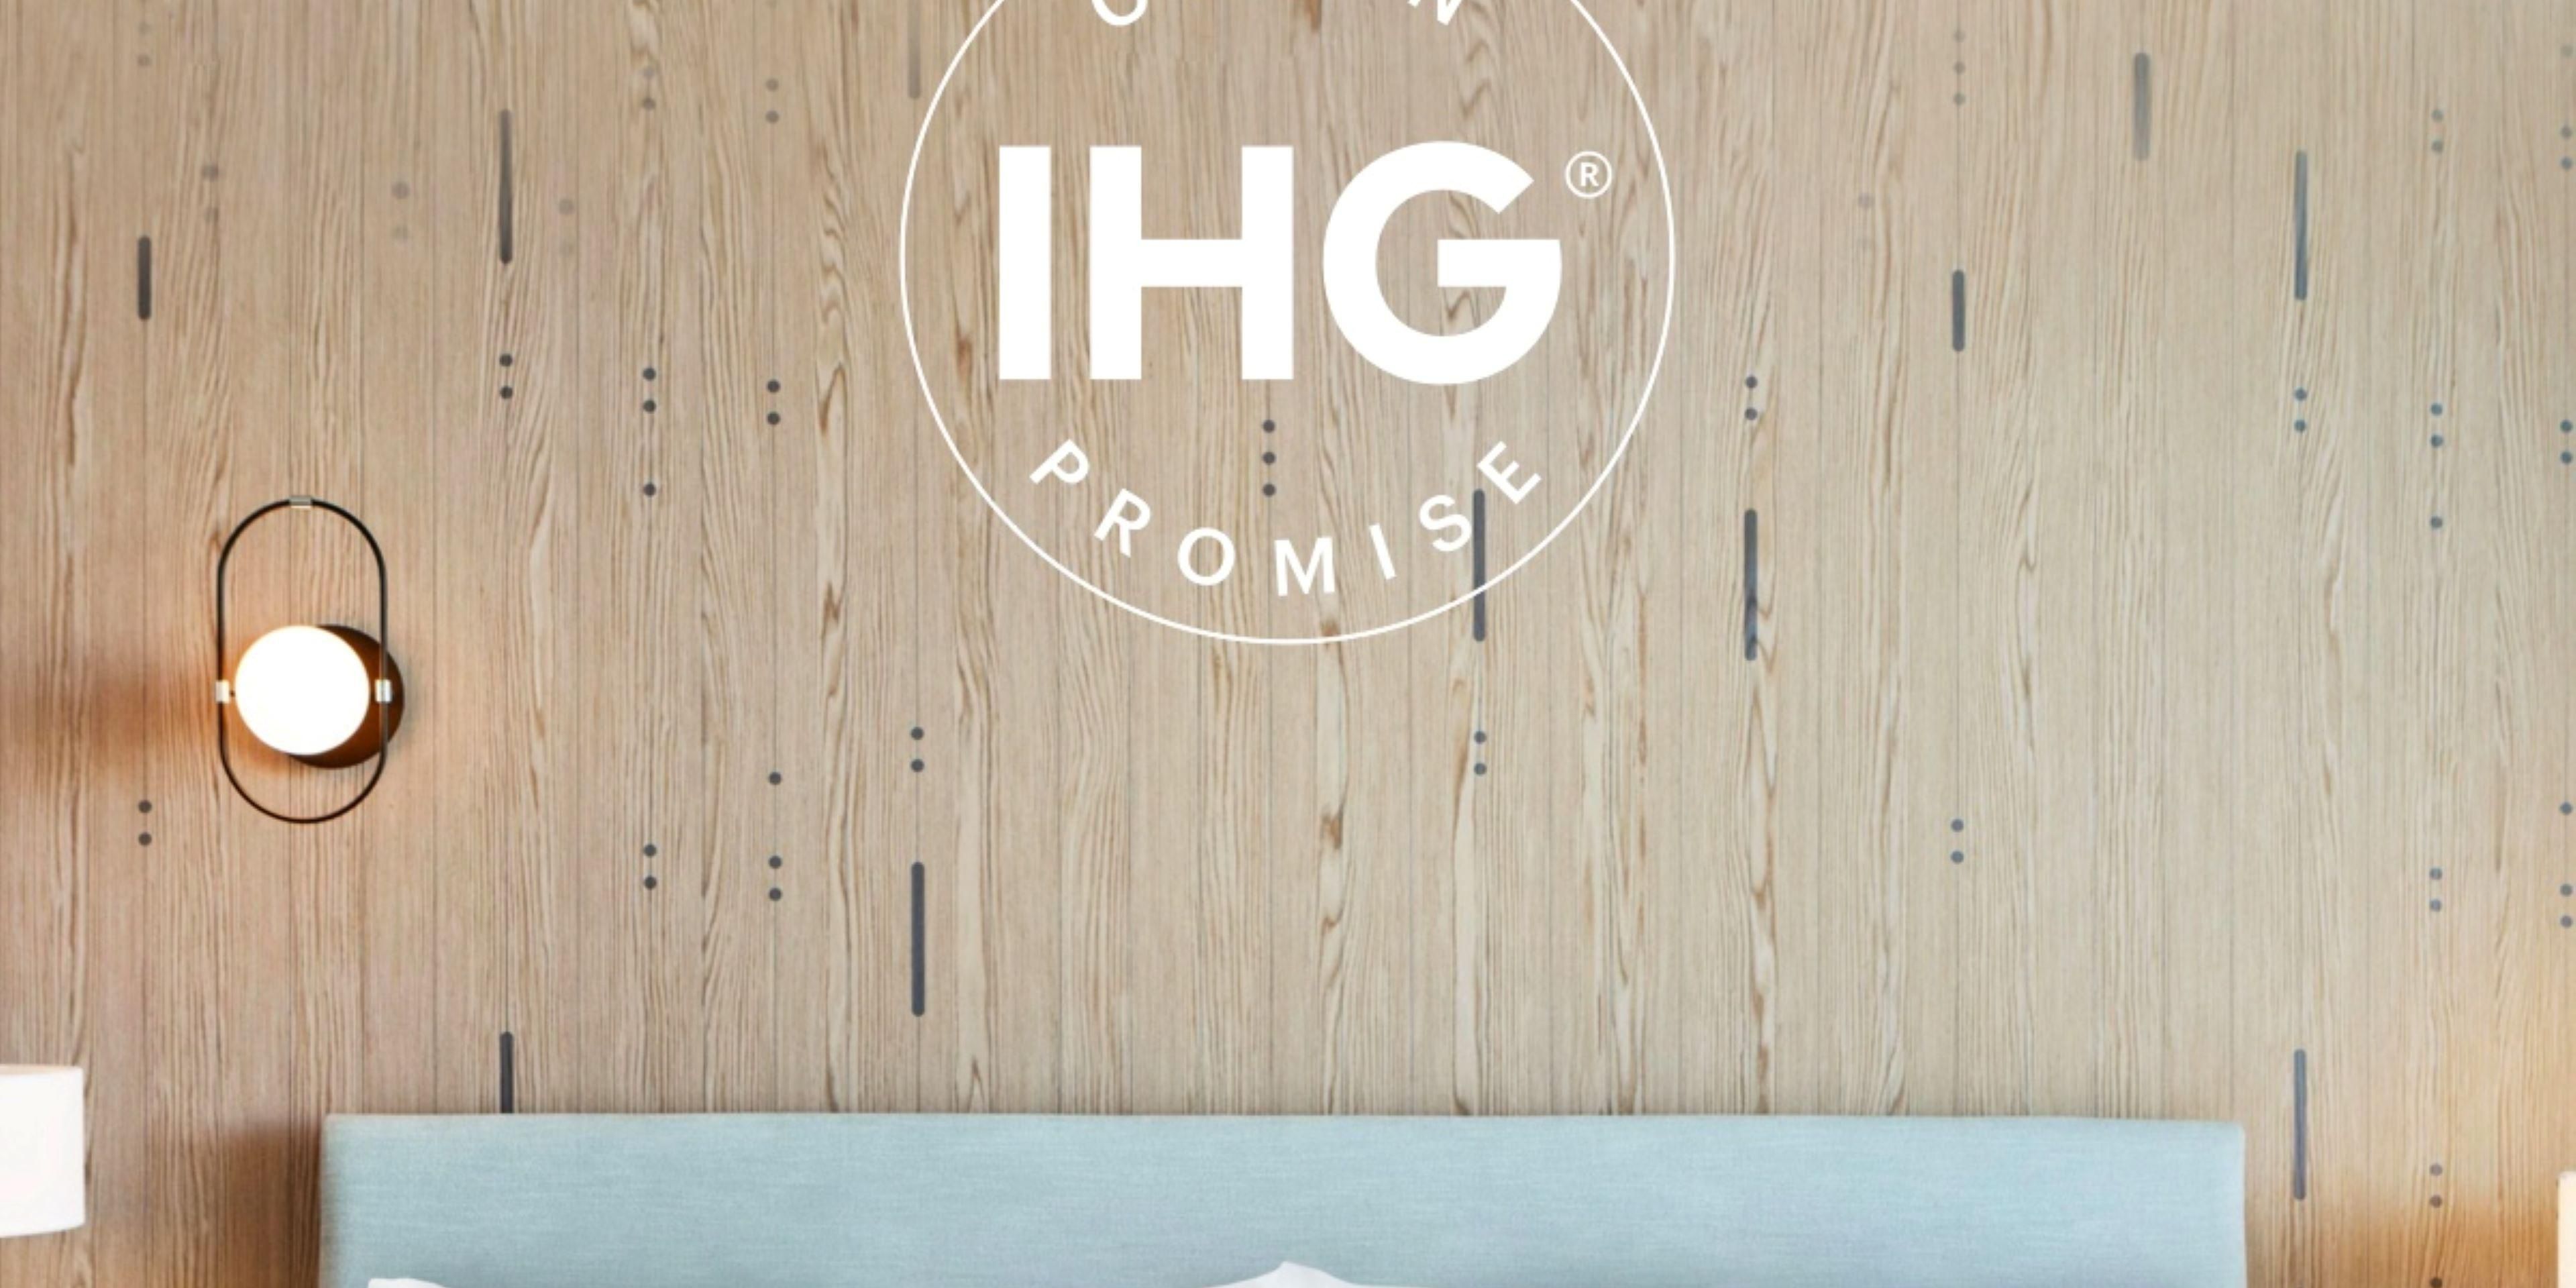 Good isn't good enough. We are committed to high levels of cleanliness. IHG has a long-standing commitment to rigorous cleaning procedures which we have now expanded with additional COVID-19 protocols and best practices.